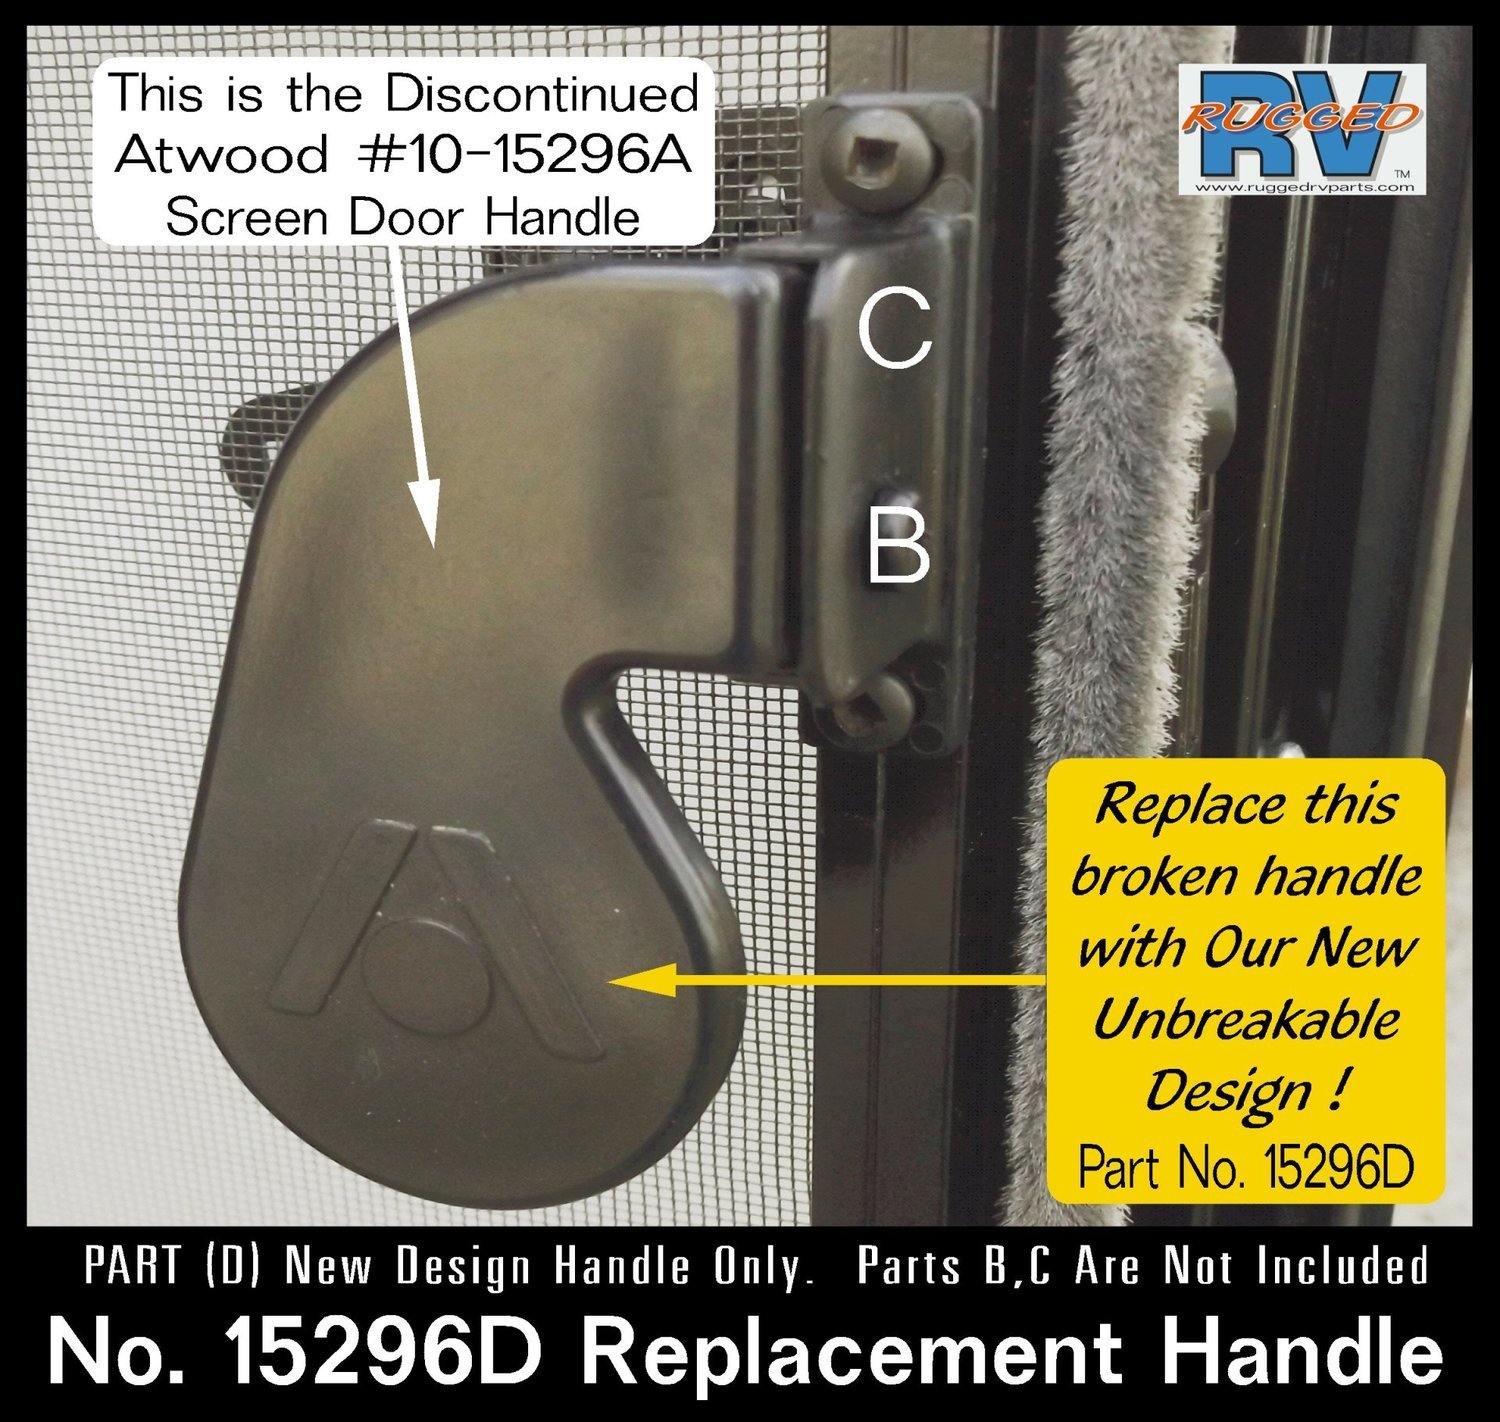 No. 15296D Atwood Style 10-15296A Screen Door Replacement Handle